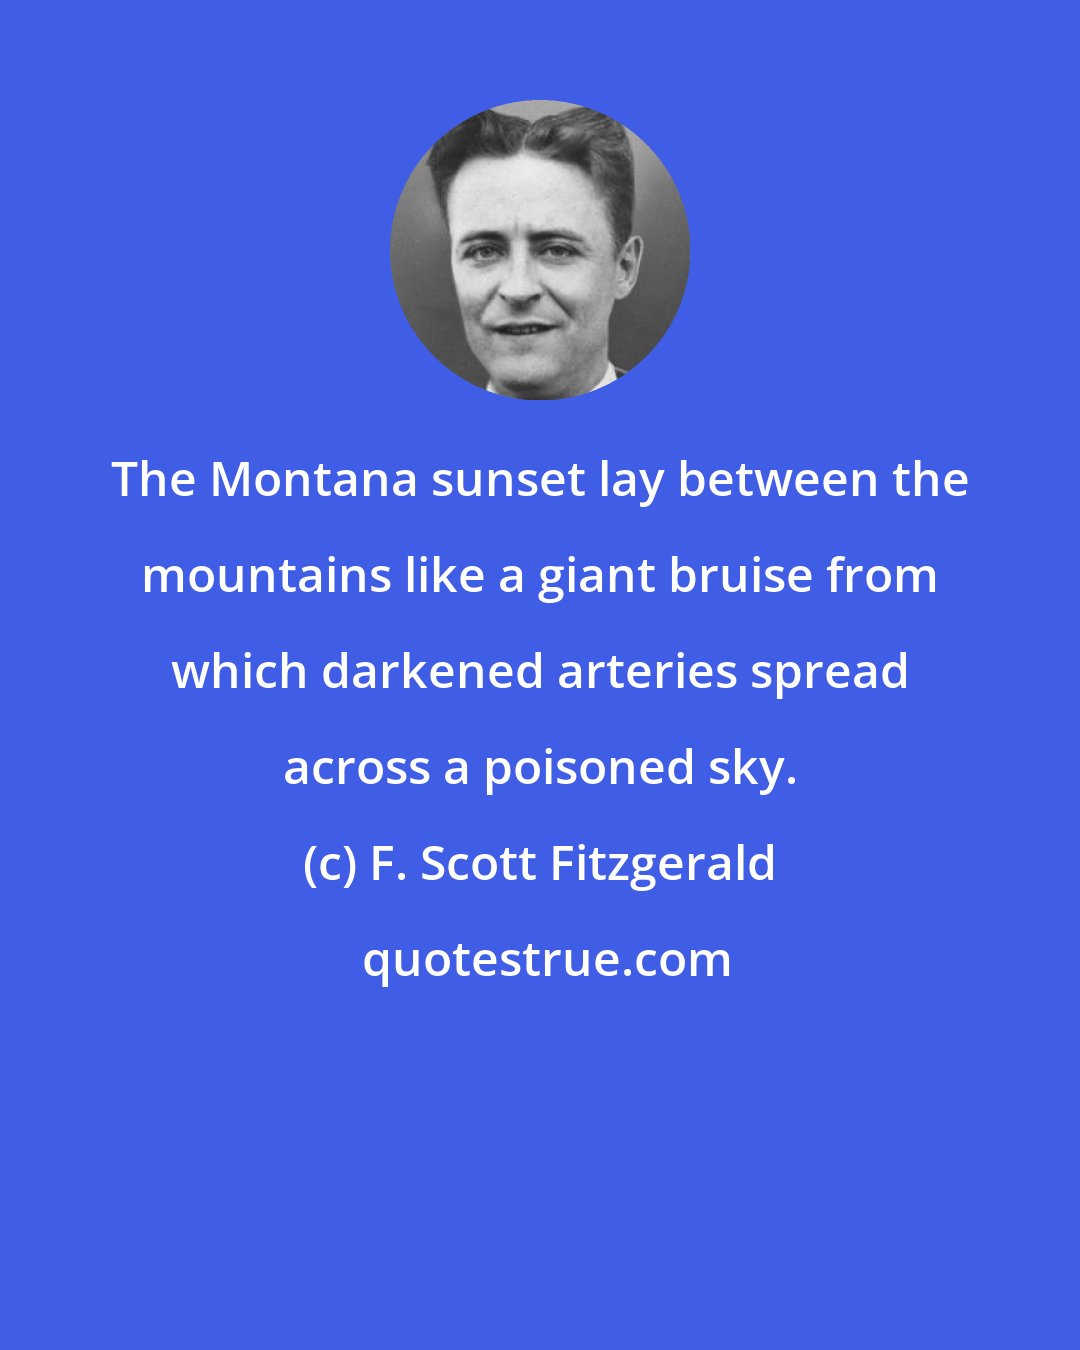 F. Scott Fitzgerald: The Montana sunset lay between the mountains like a giant bruise from which darkened arteries spread across a poisoned sky.